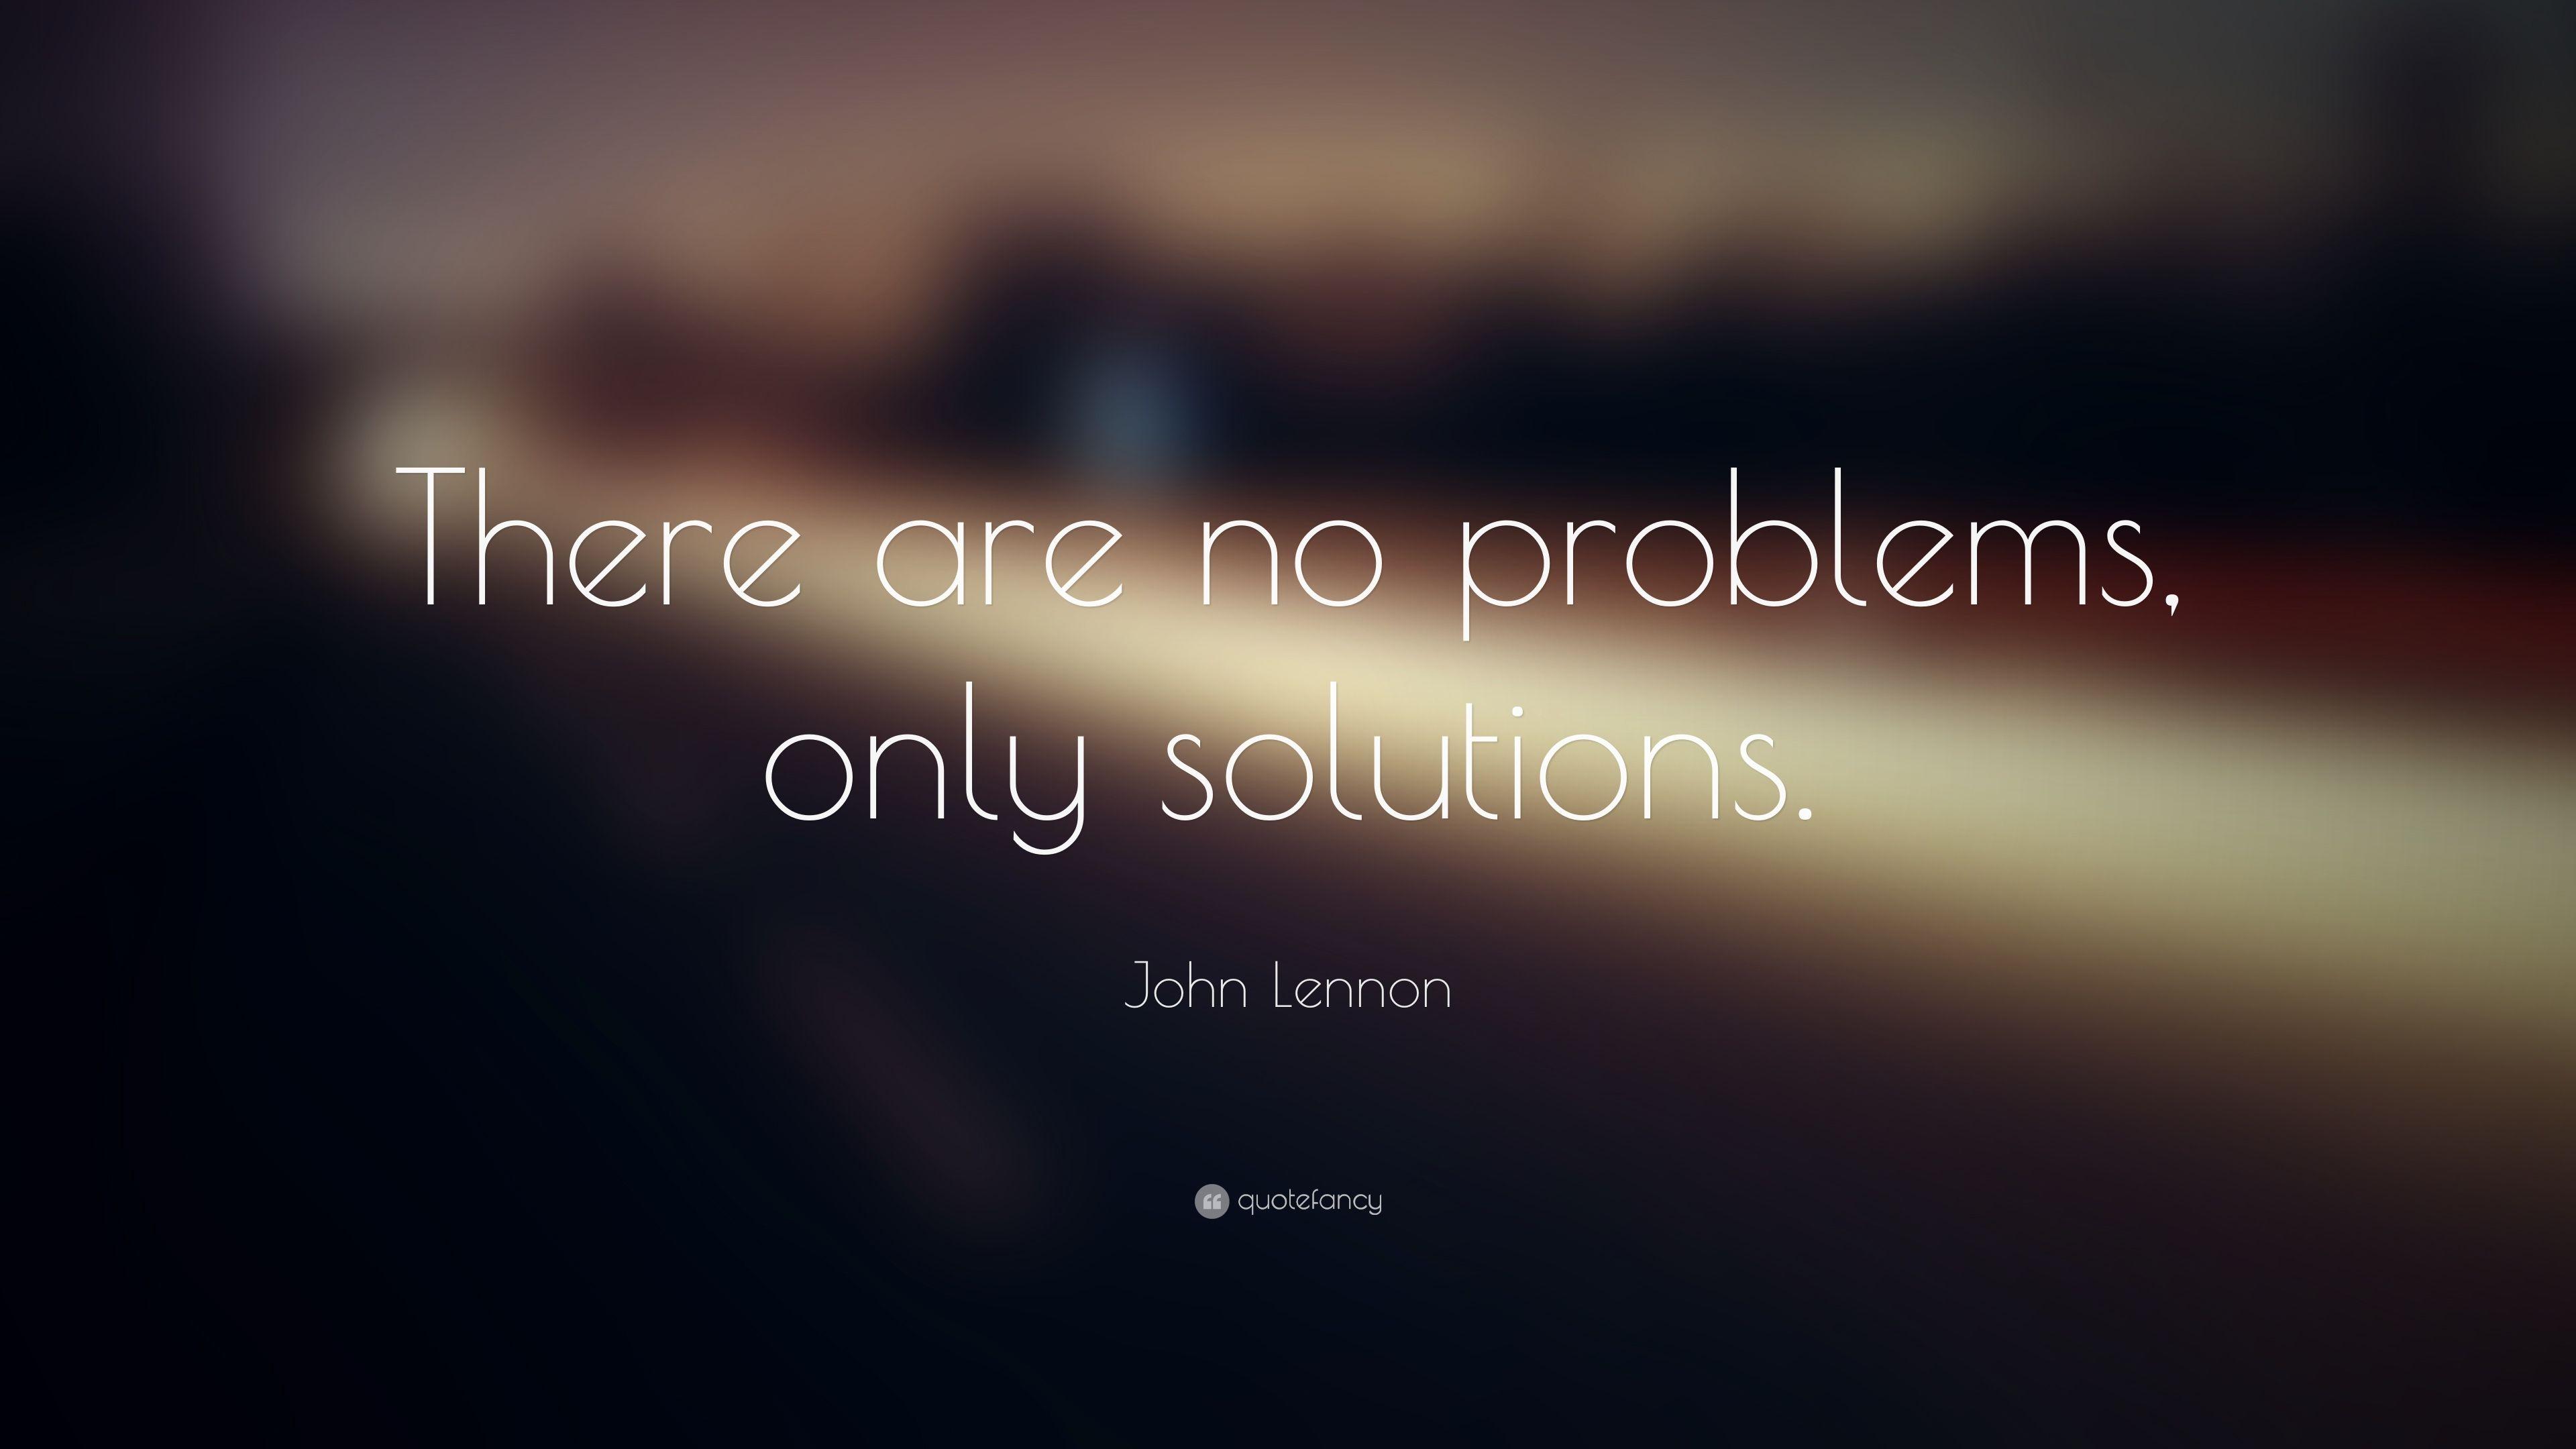 John Lennon Quote: “There are no problems, only solutions.” 20